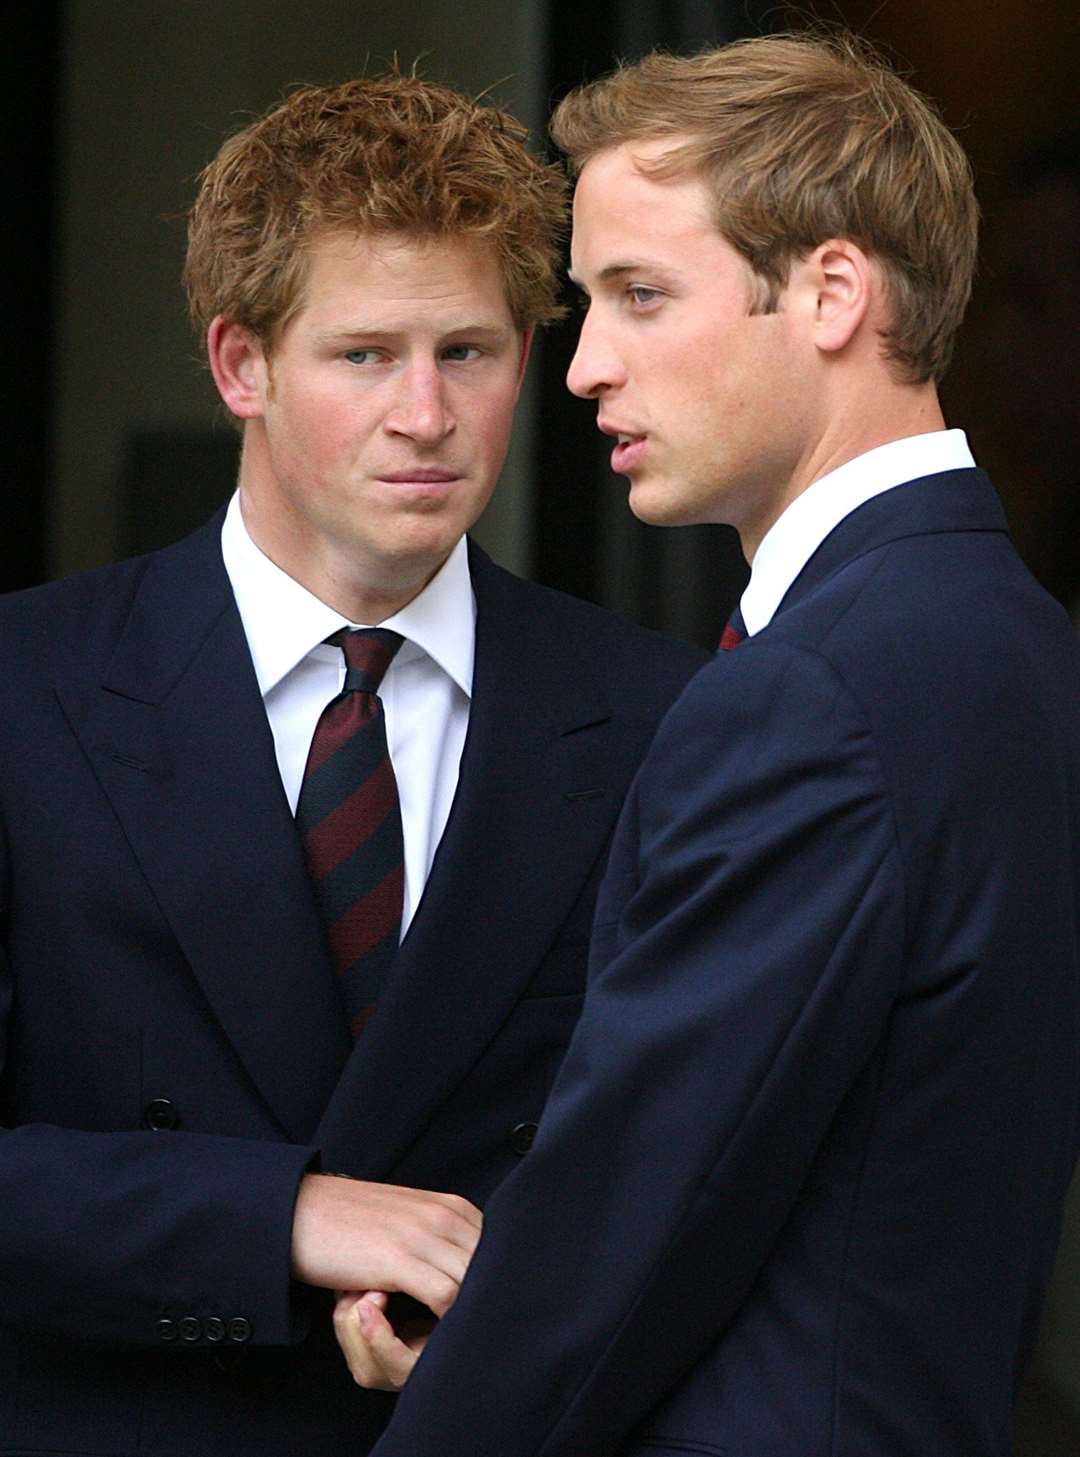 Harry and William at the Thanksgiving for the life of Diana, Princess of Wales in 2007 (Lewis Whyld/PA)